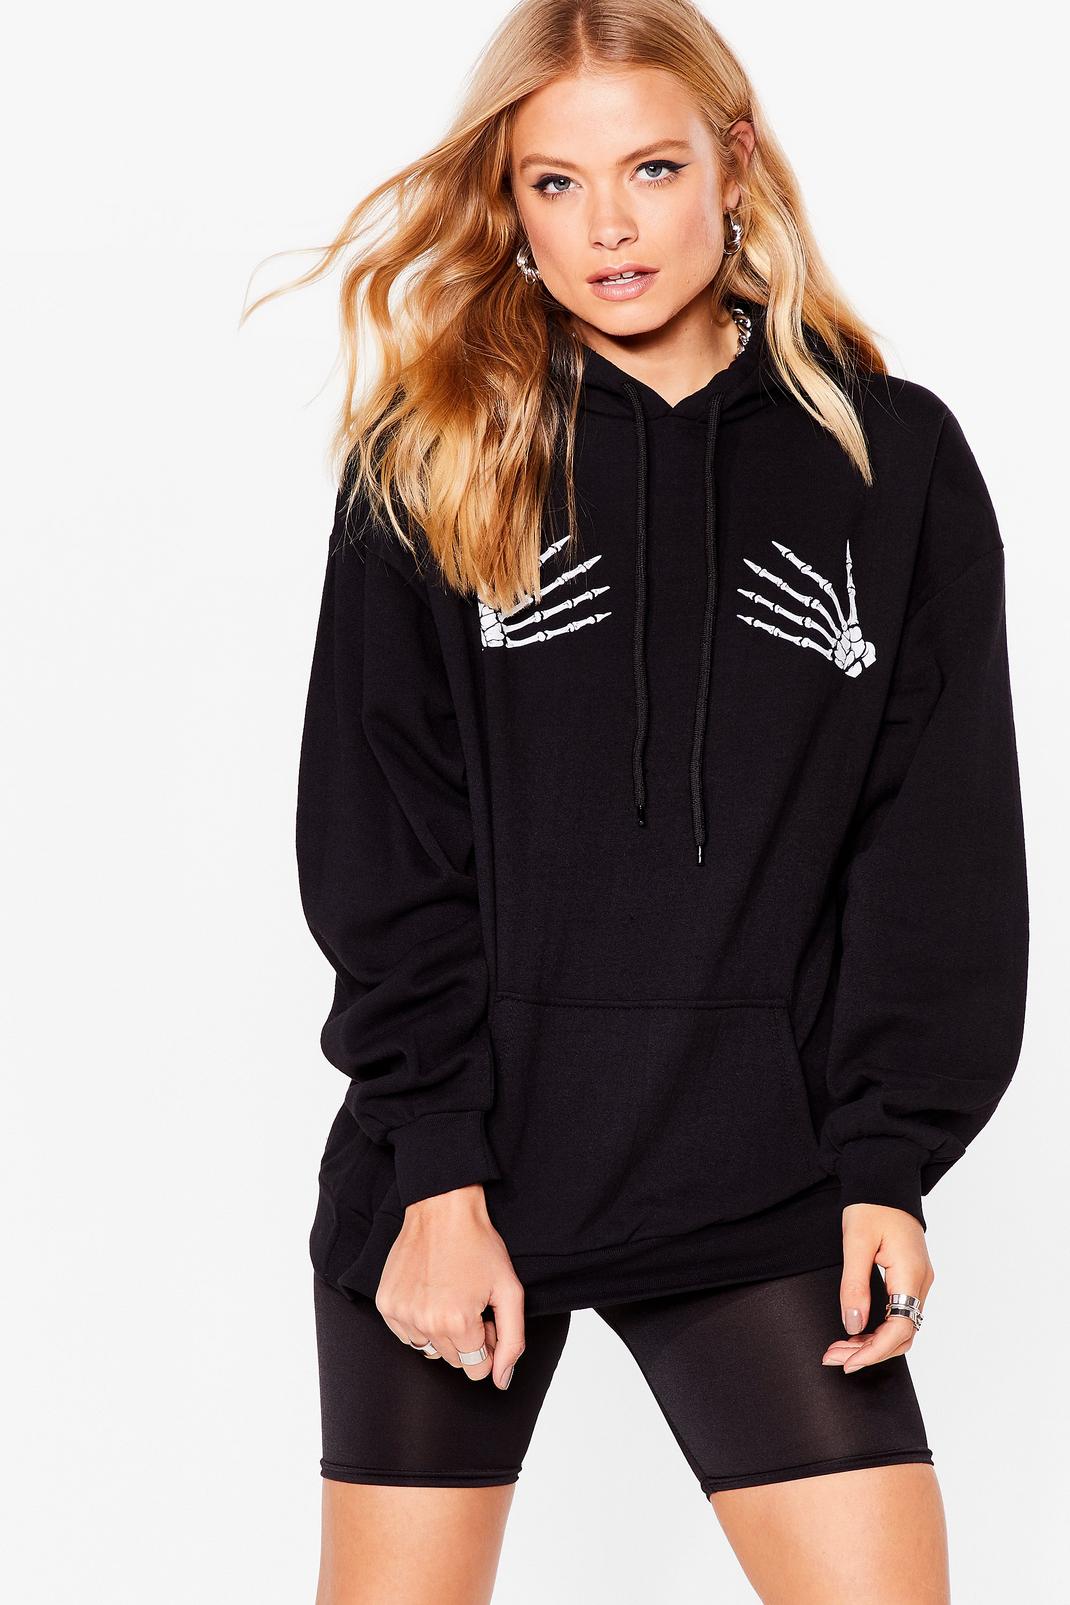 Gotta Hand It to You Skeleton Graphic Hoodie image number 1